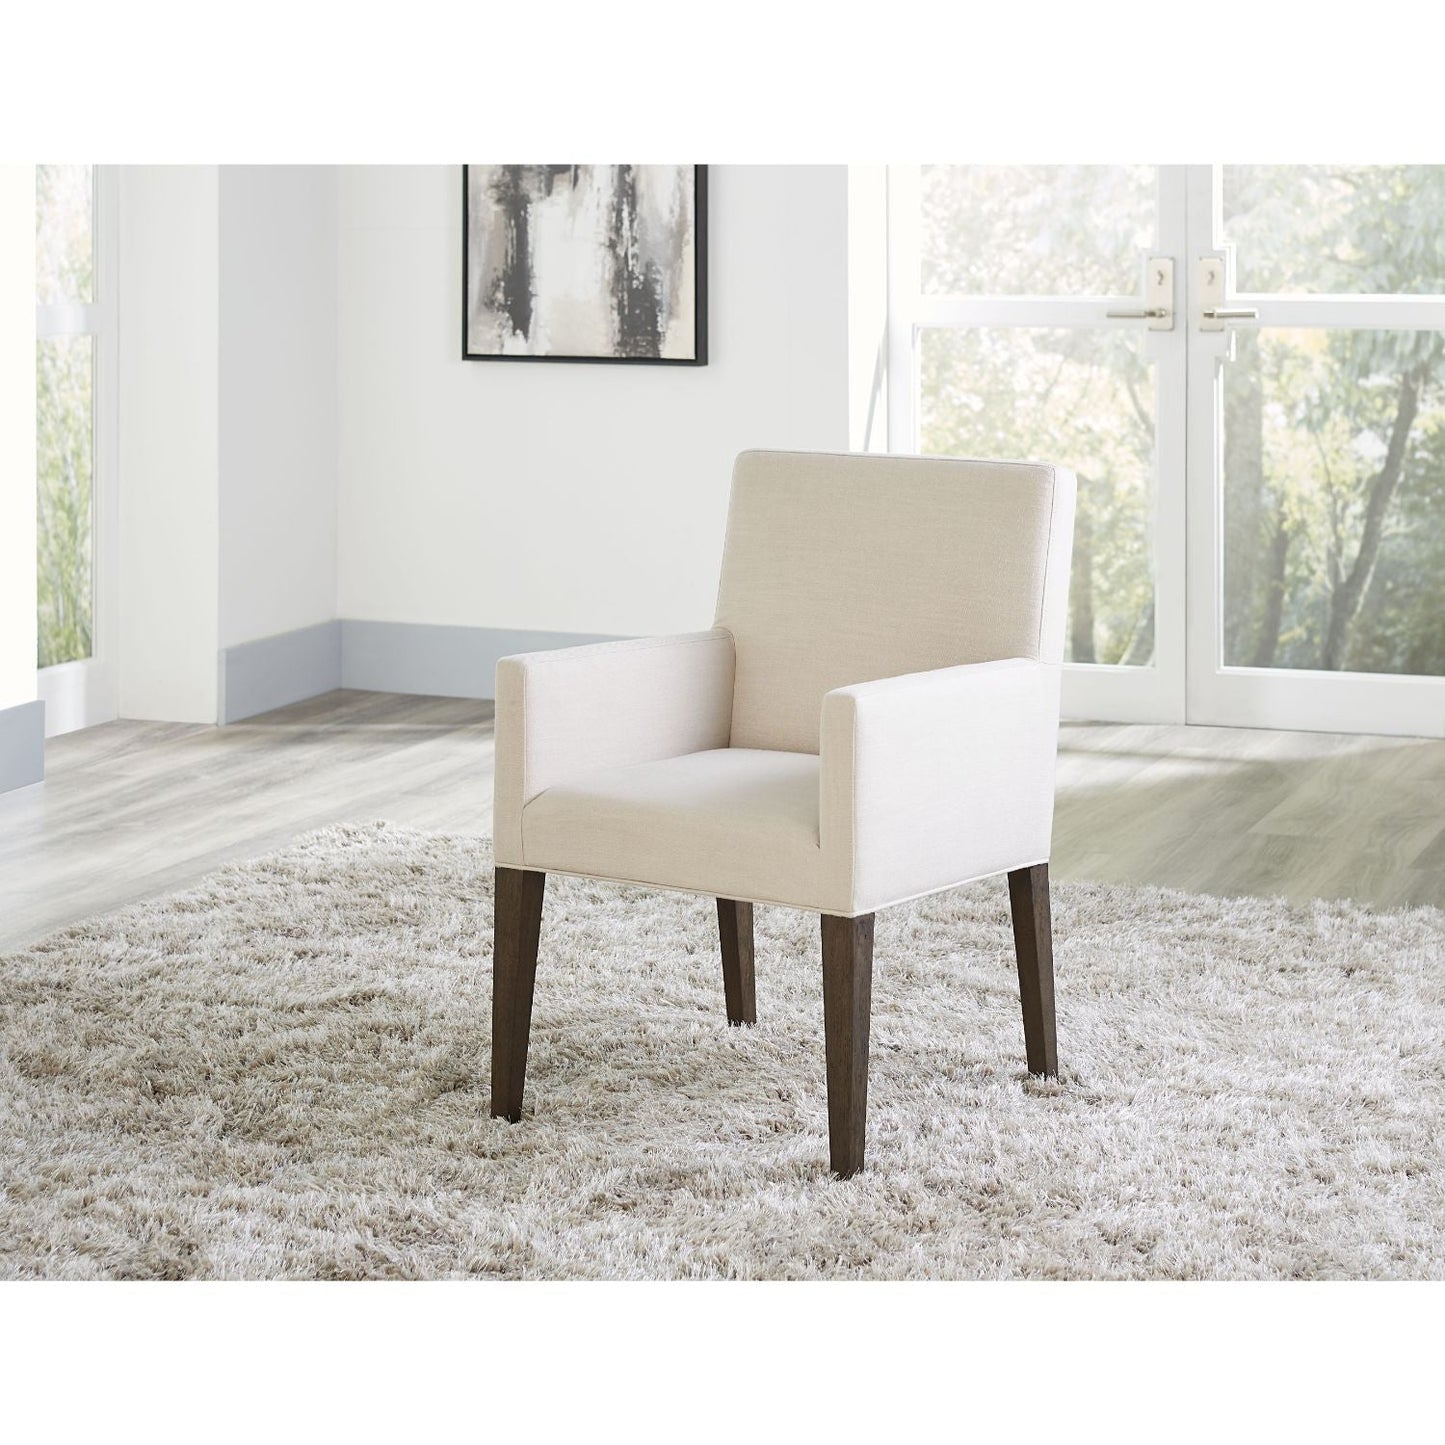 Modus Modesto Upholstered 2 Arm Chair in French Roast